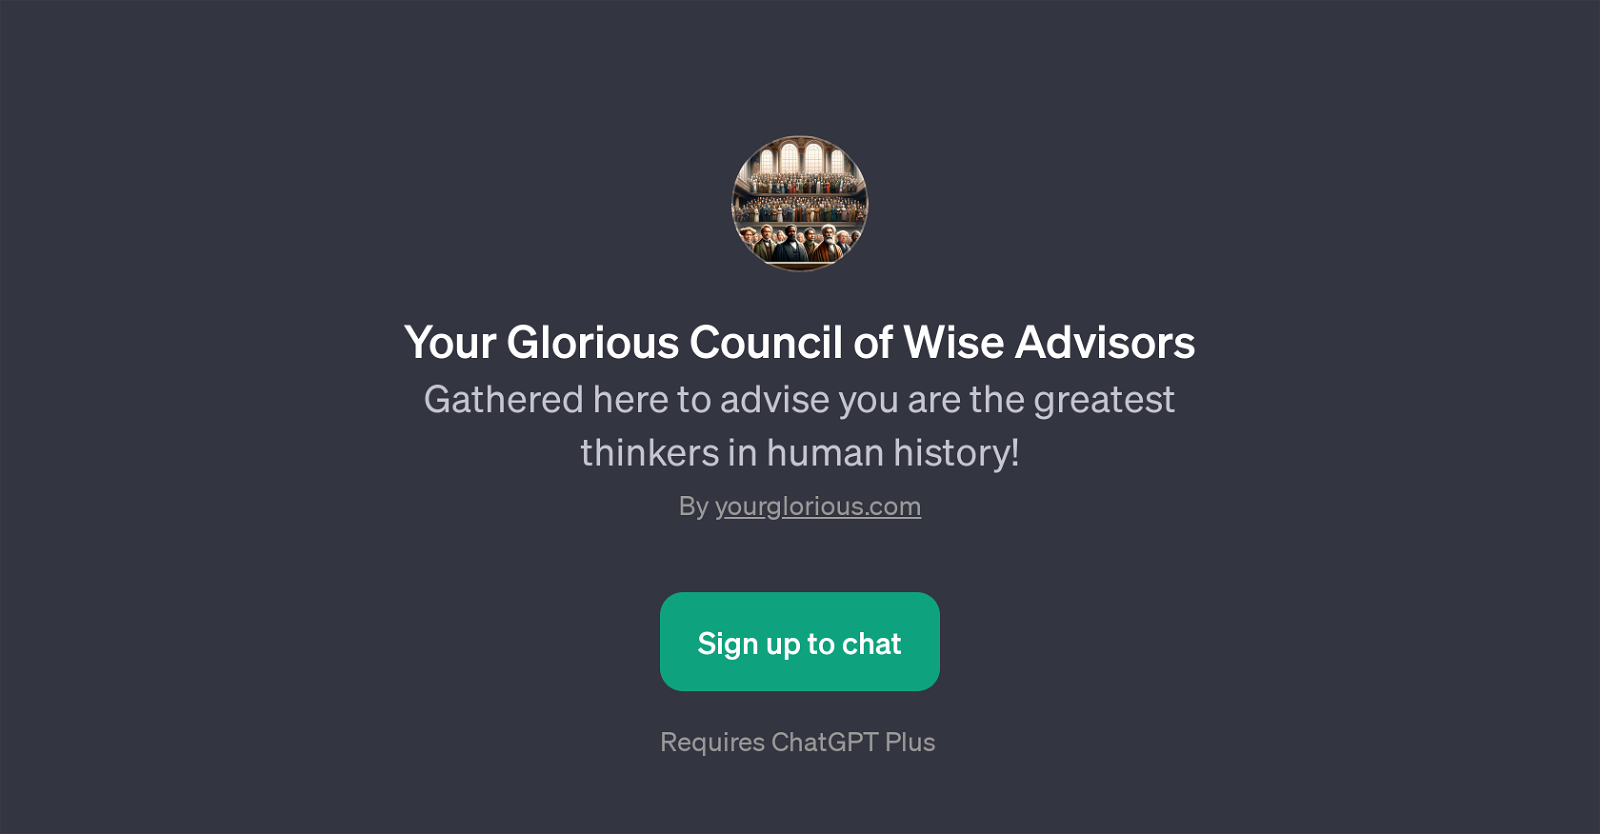 Your Glorious Council of Wise Advisors website